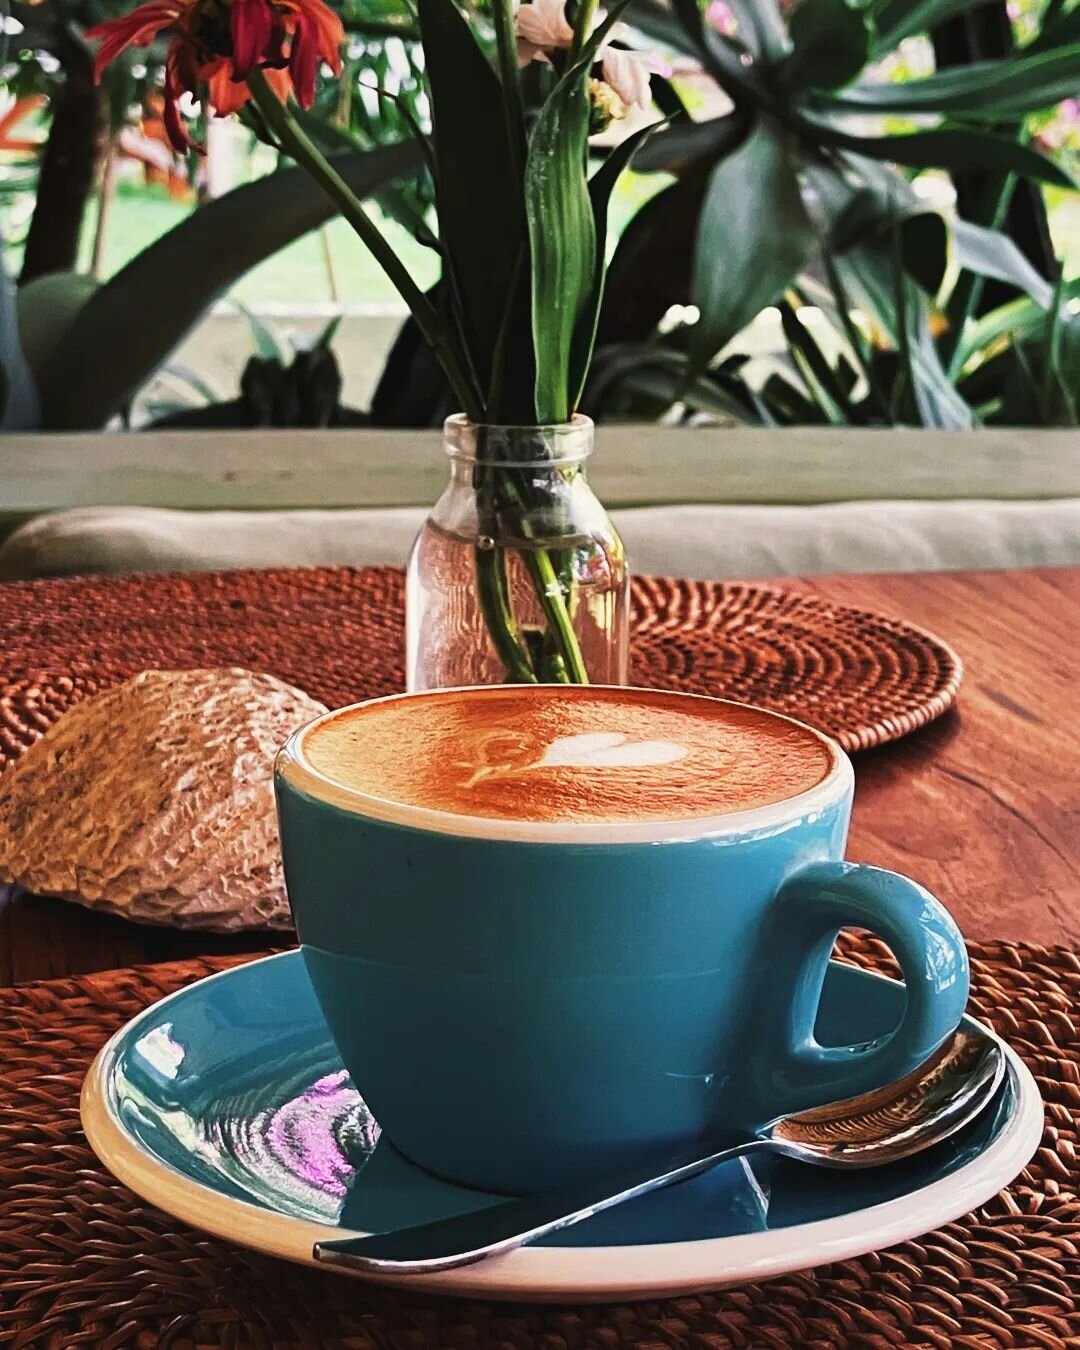 The classic.
Do it right, or dont do it at all 😉

#mulemalu #tropicalstay #cappuccino #bali